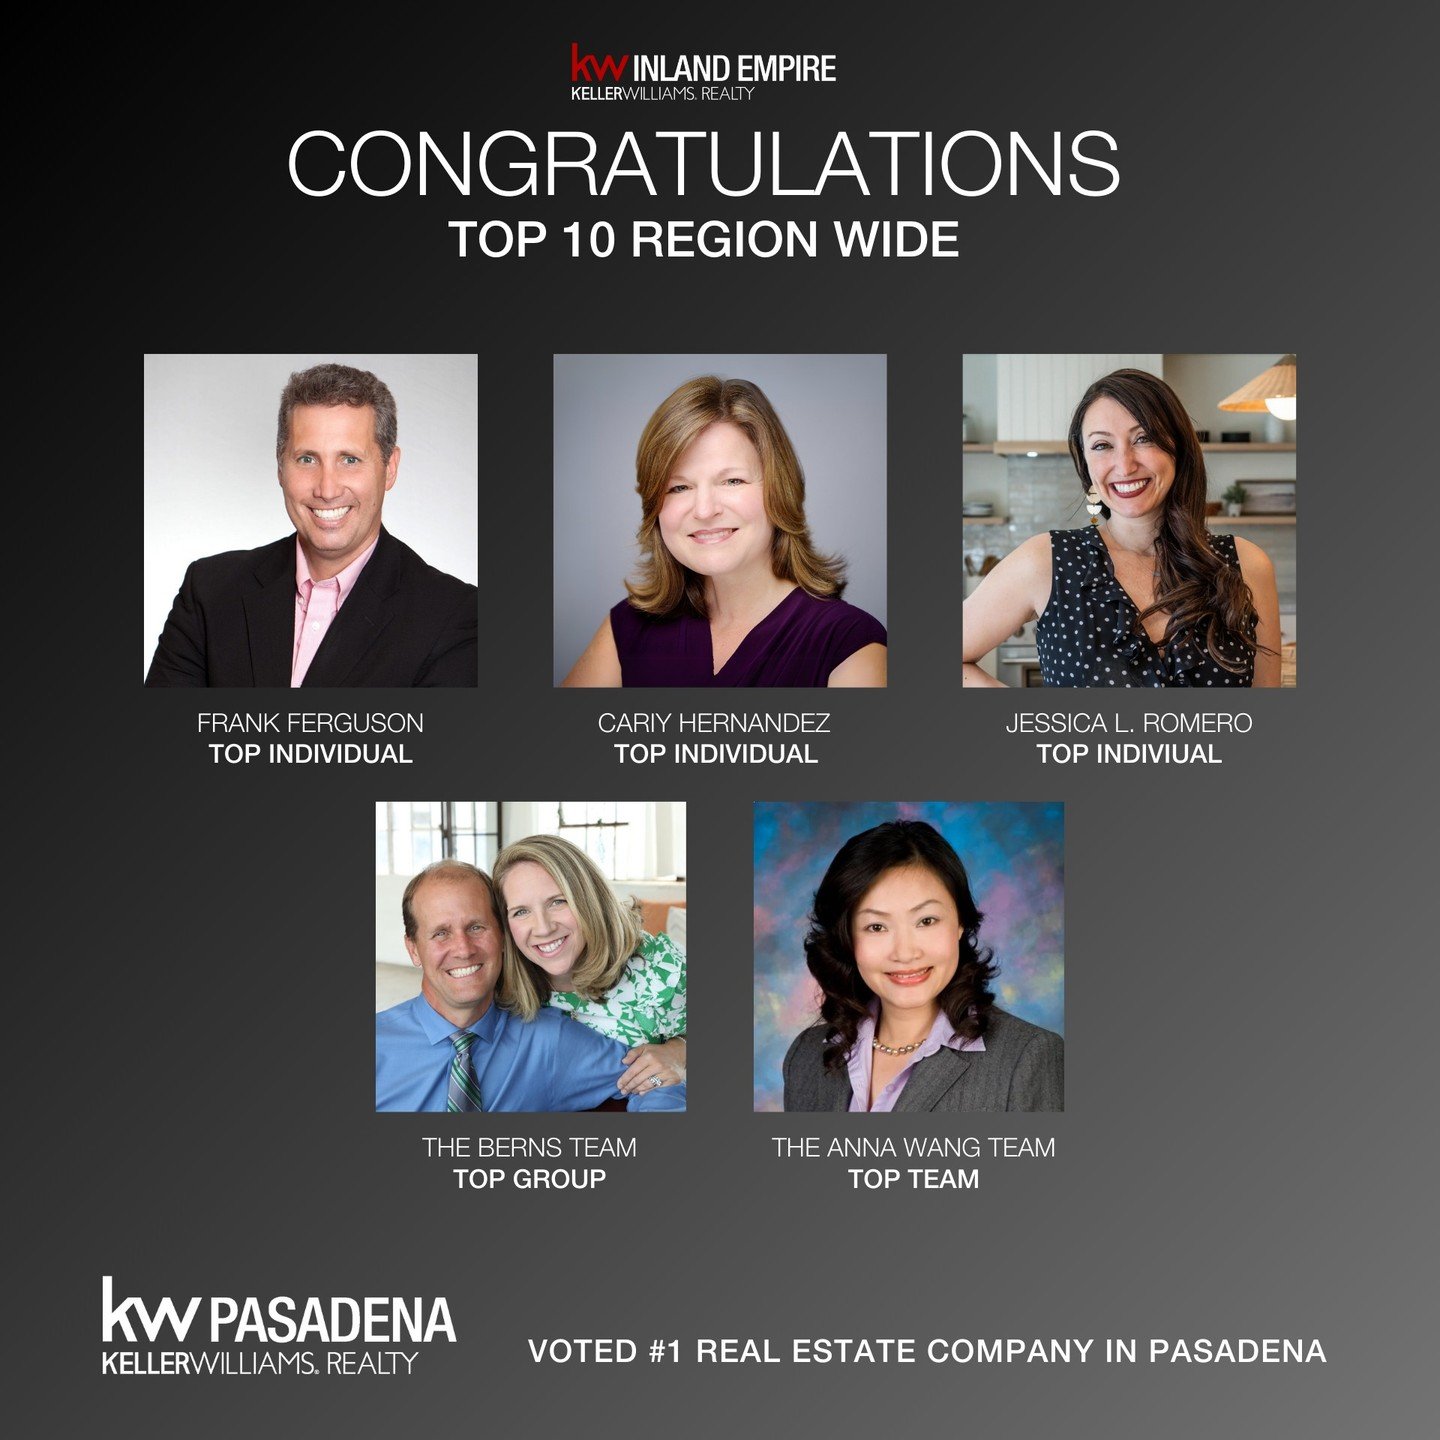 Congratulations to March's Top Producers Region Wide!!! Frank Ferguson Top Individual, Cairy Hernandez | Top Individual, Jessica L. Romero | Top Individual, The Anna Wang Team | Top Team, The Berns Team | Top Group. This places you in the top 10 Regi